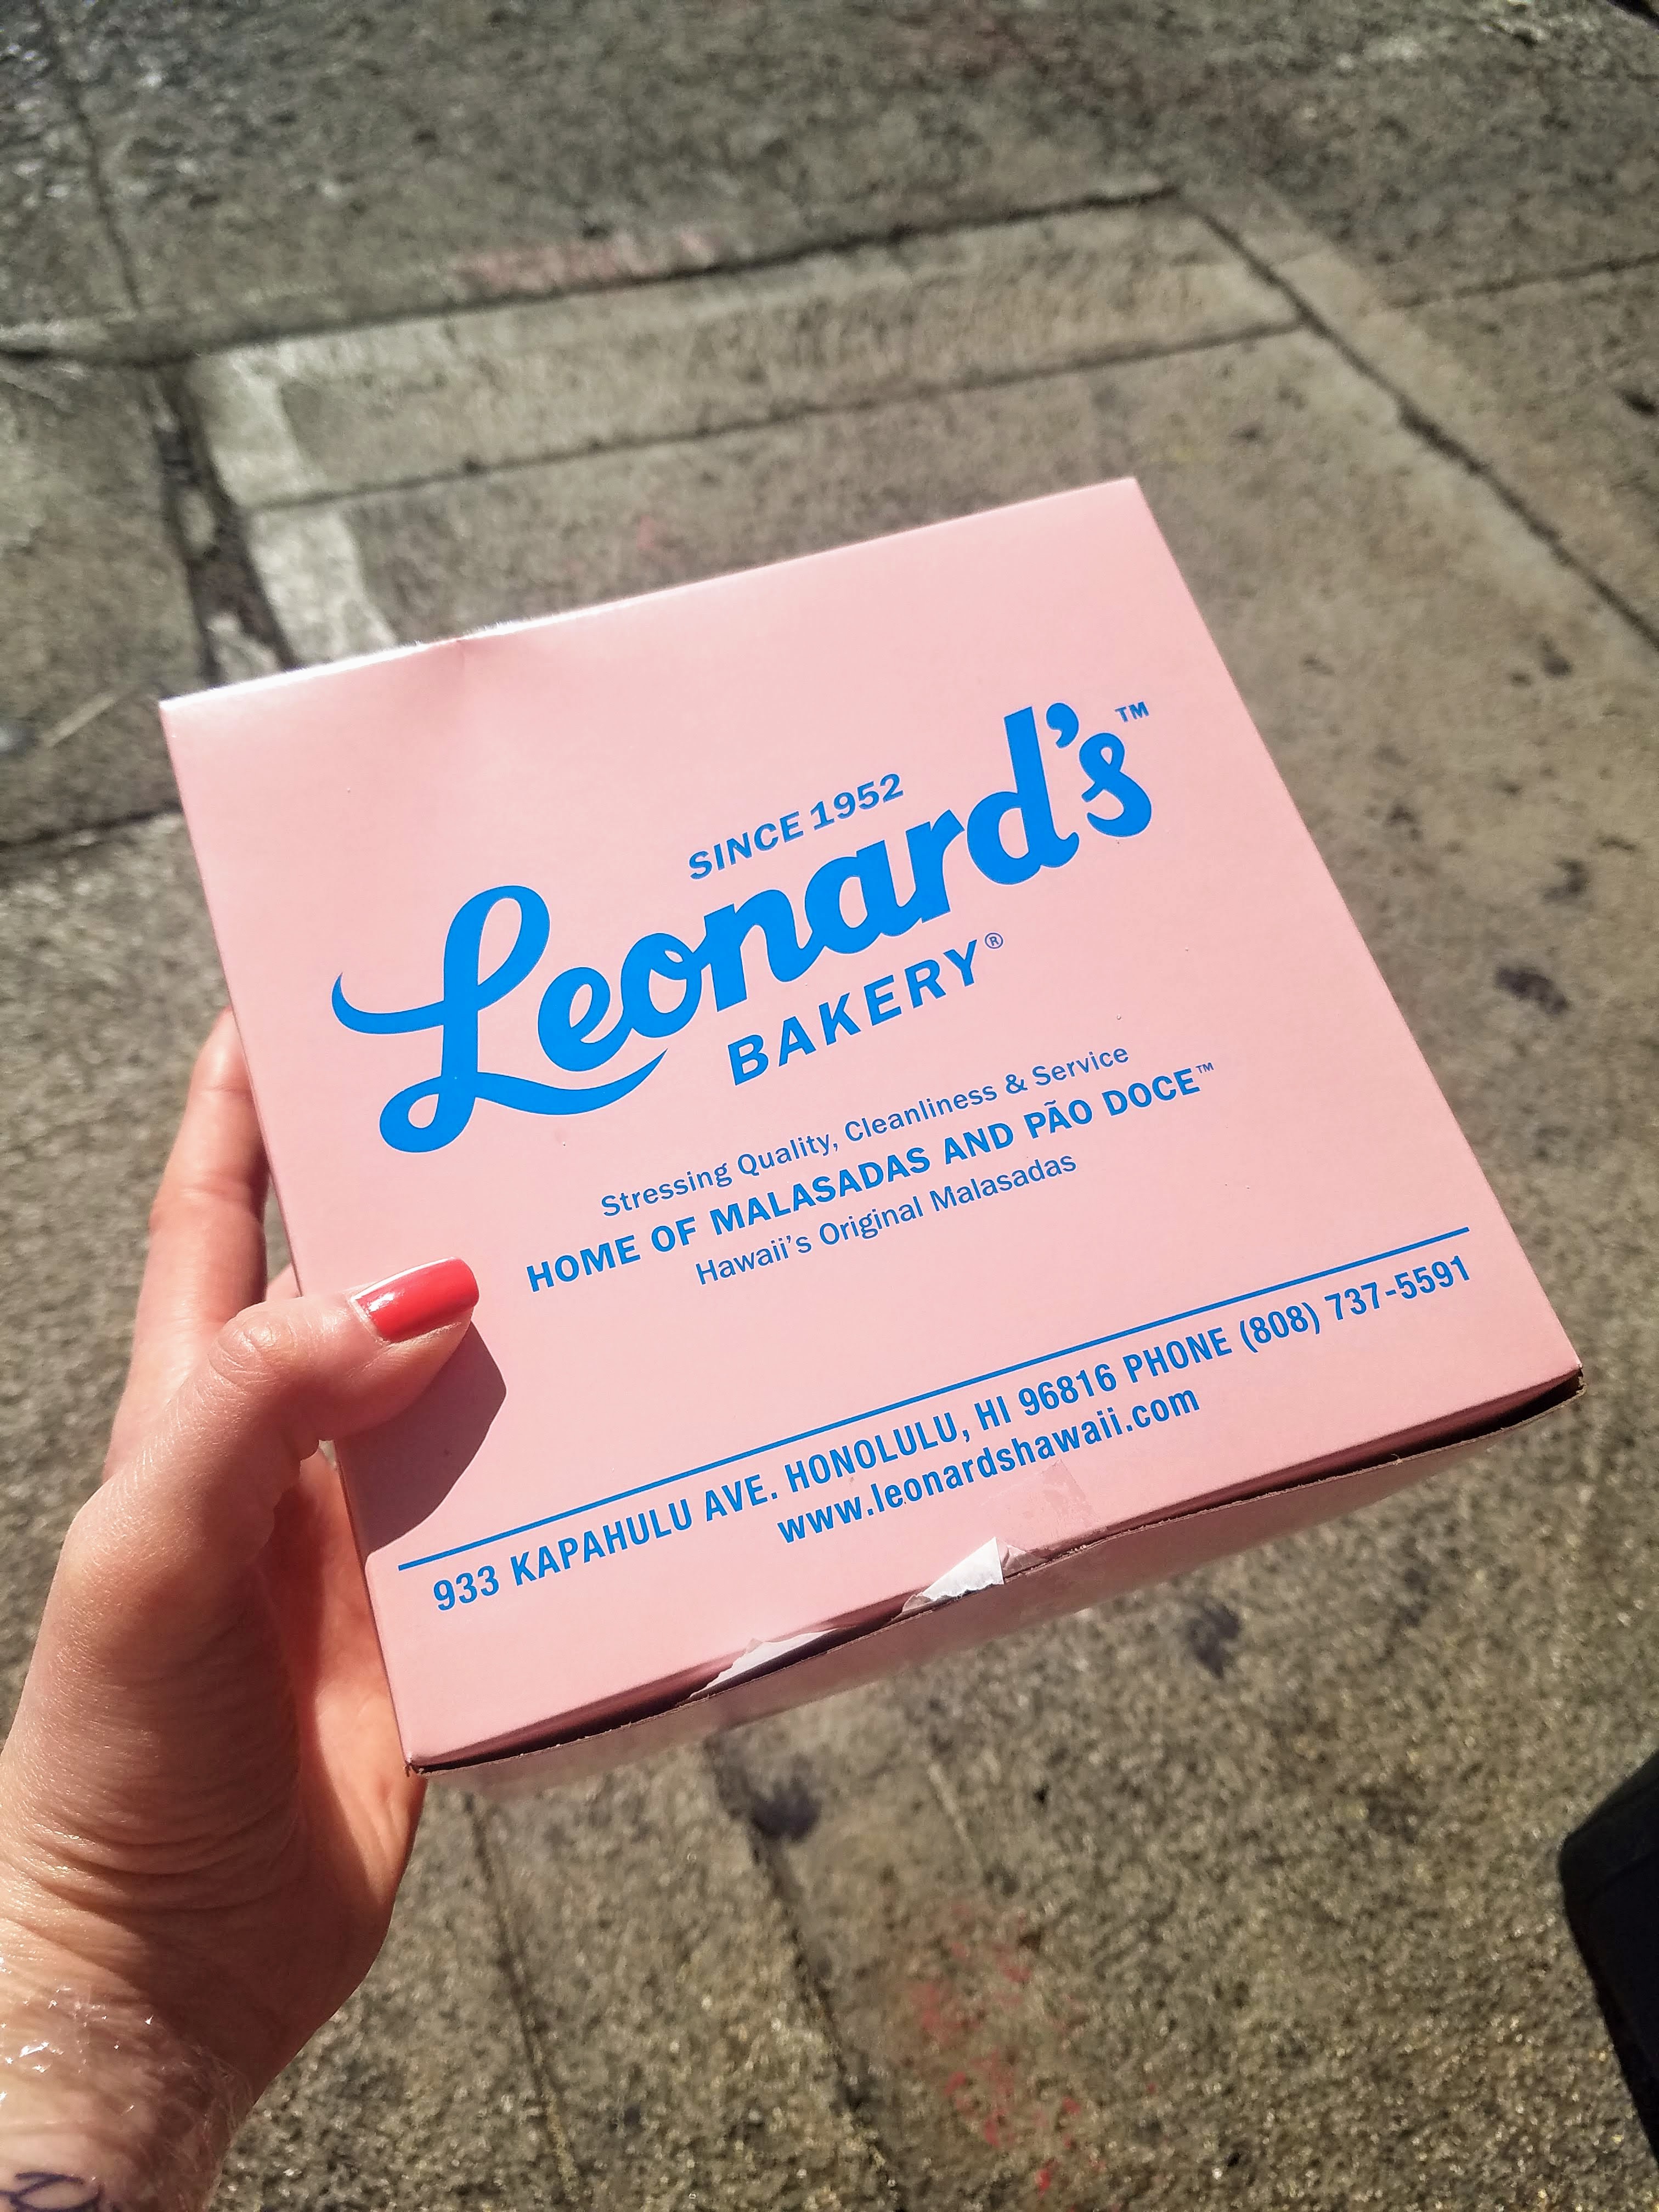 a pink square box with Leonard's bakery written in blue.